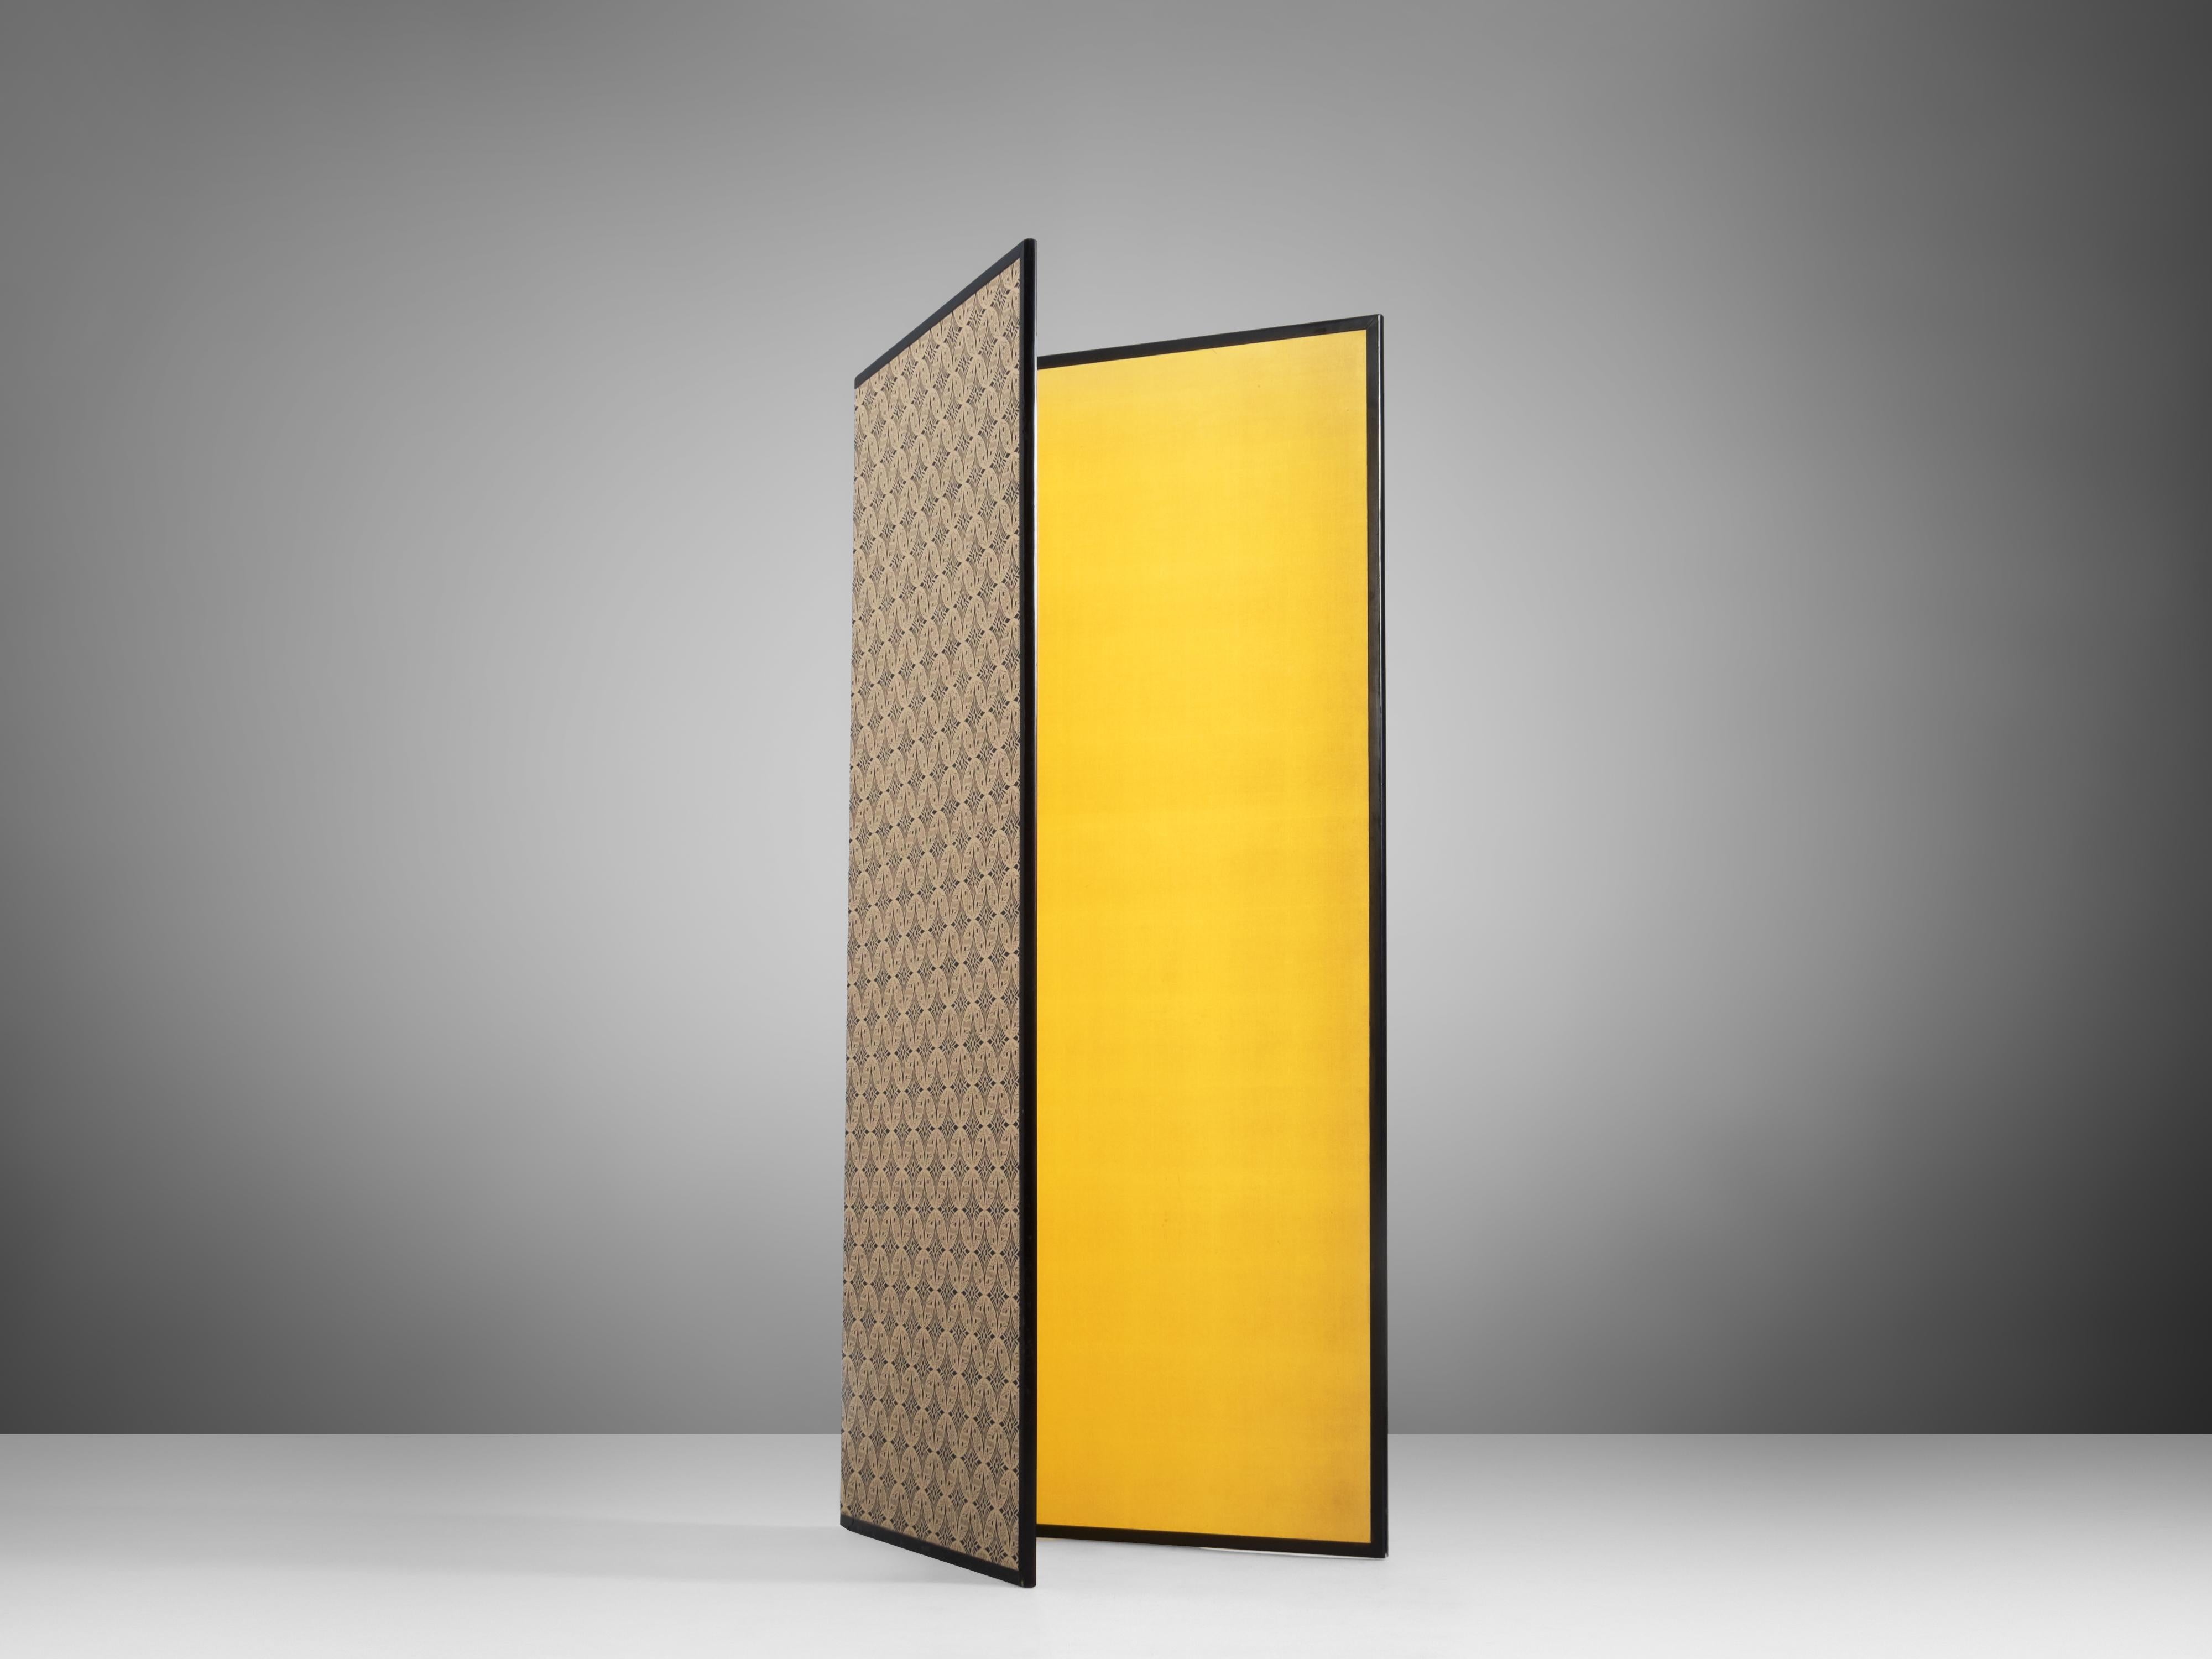 Room divider or screen, gold leaf, lacquered wood, France, 1960s.

Gold leaf folding screen from French origin. The two panels are carefully decorated with a geometric pattern on the outside and gold leaf on the inside. The inside beautifully